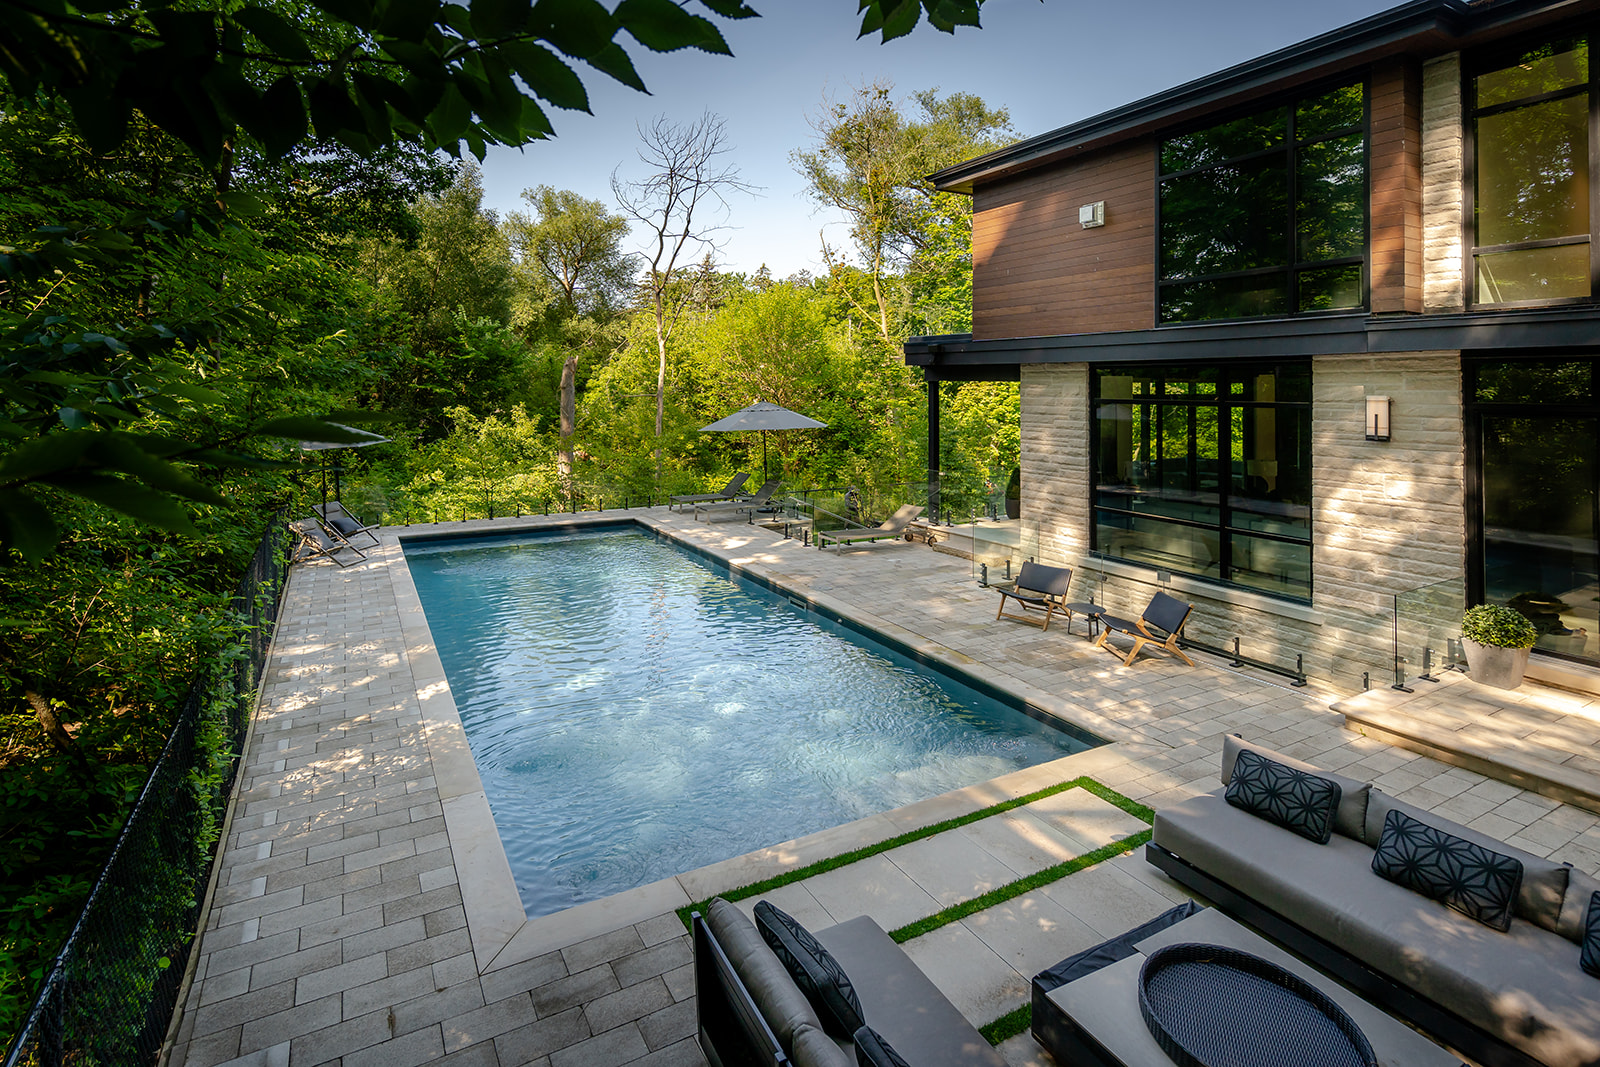 An inground pool with an outdoor patio set, two umbrellas open near the back and chairs scattered around the pool.